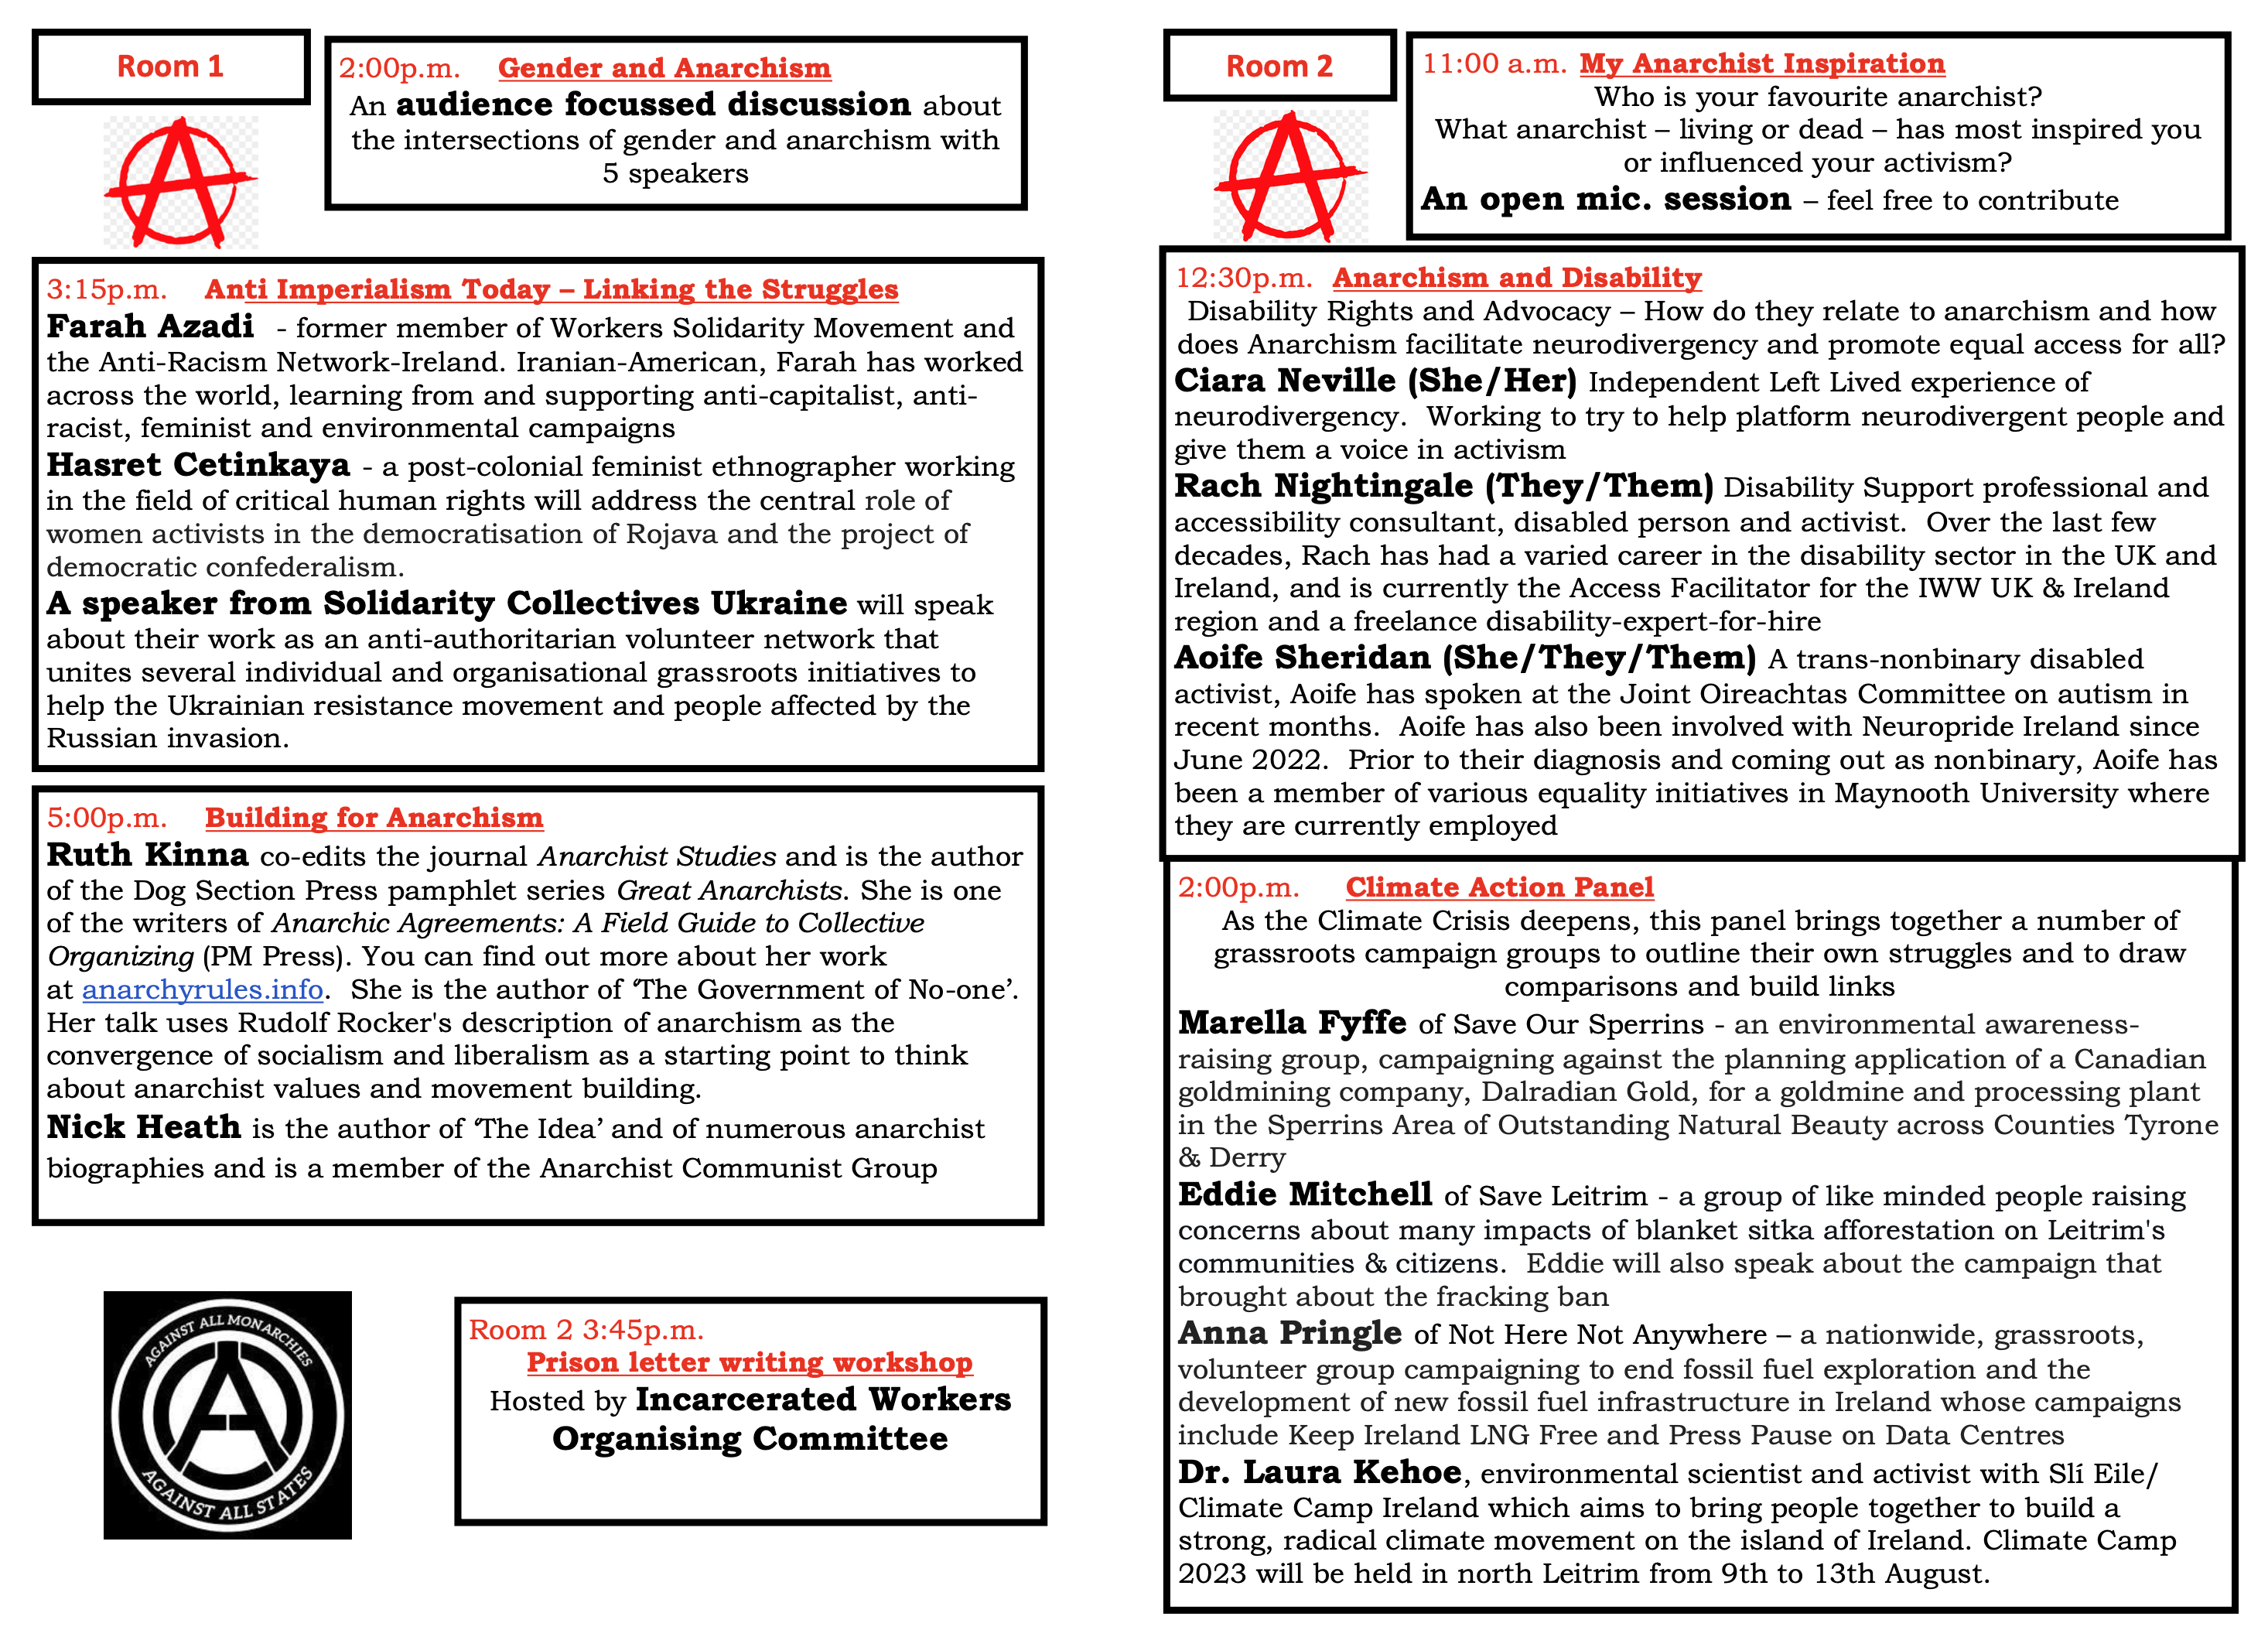 Programme for the Dublin Anarchist Bookfair on Saturday 20th May 2023